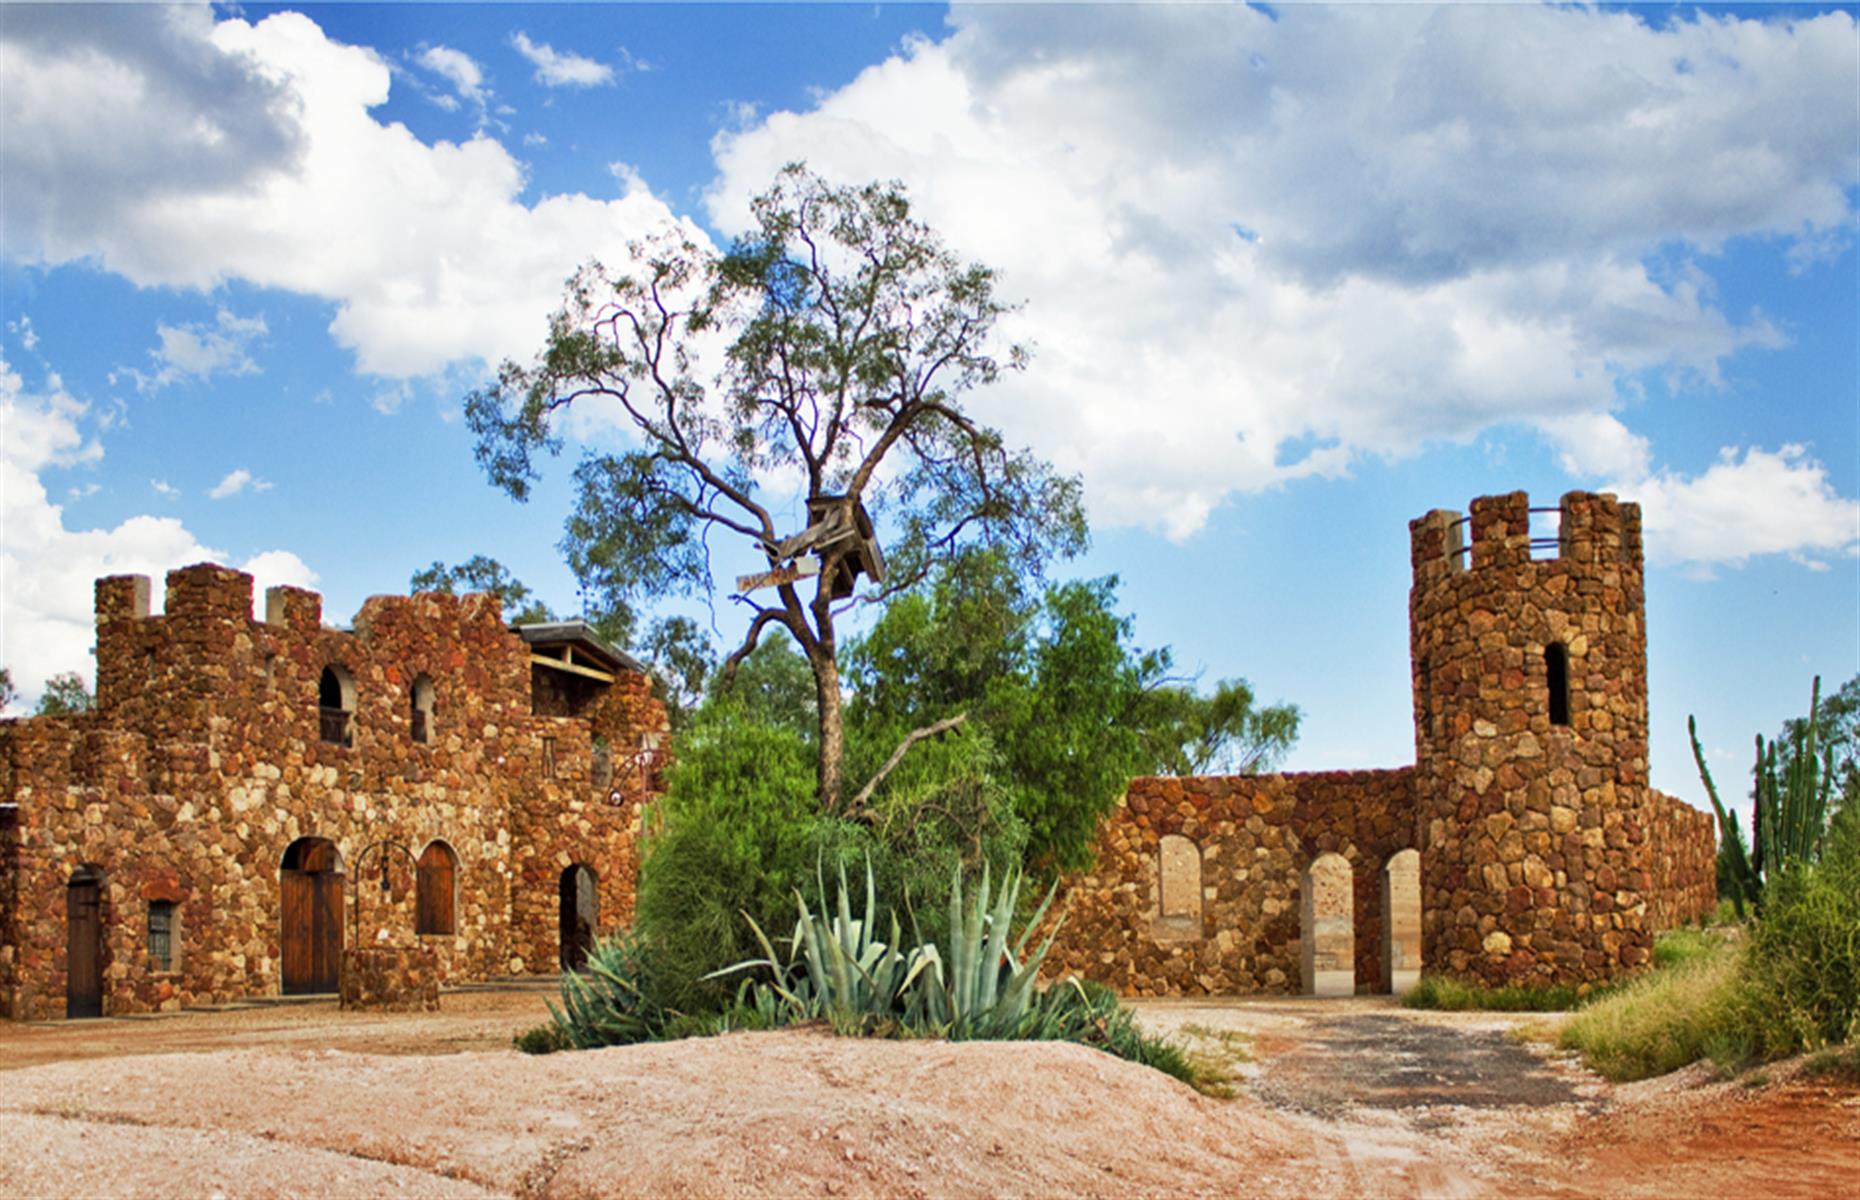 <p>A medieval-style Italian castle is the last thing you'd expect to find in the dusty opal mining town of Lightning Ridge in northwestern New South Wales. It was built by hand in the 1980s using ironstone boulders that Italian miner Vittorio Stefanato, known locally as Amigo, collected. The structure is now heritage-listed and open to visitors. There’s also the incredible opportunity to see dinosaur bones (possibly from a plesiosaur) tucked 49 feet (15m) beneath the castle, accessible via a network of tunnels. </p>  <p><a href="https://www.loveexploring.com/galleries/91760/40-of-australias-most-stunning-natural-wonders?page=1"><strong>Check out 40 of Australia's most stunning natural wonders</strong></a></p>